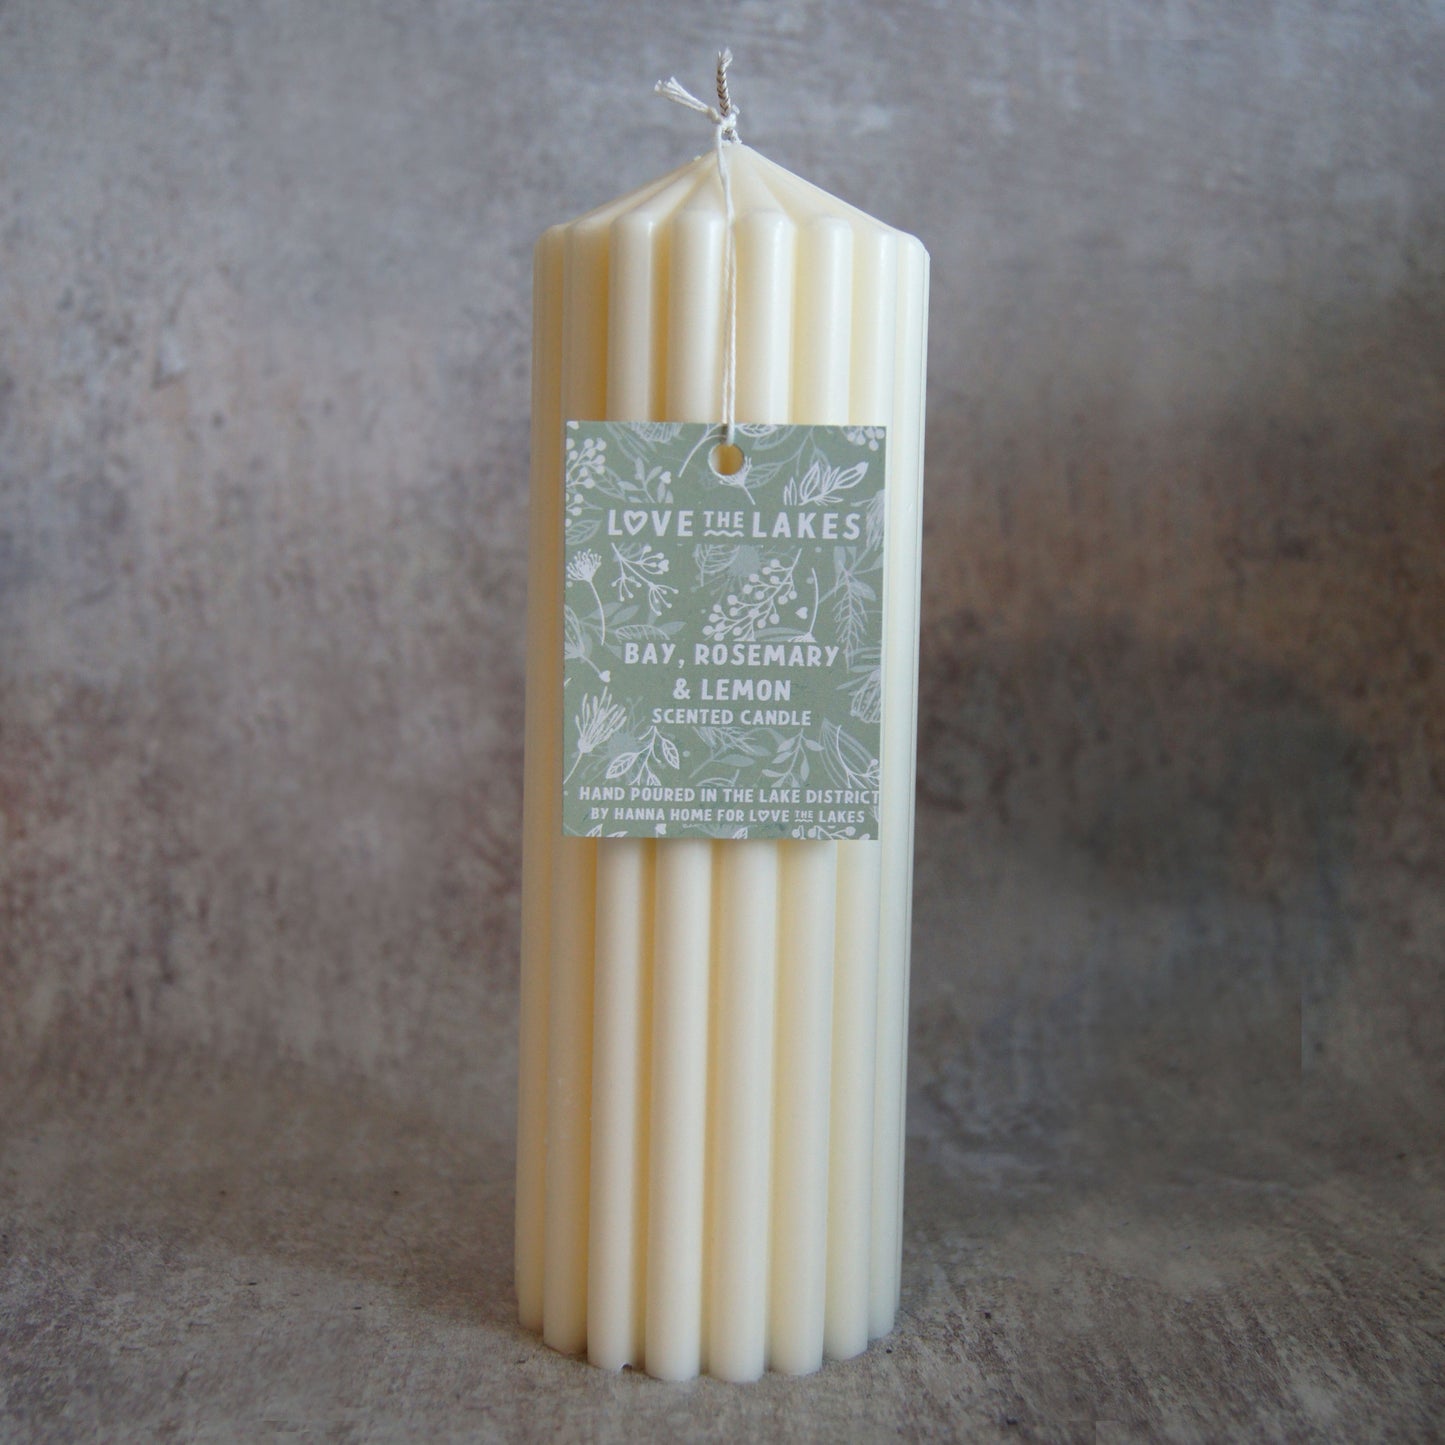 Bay, Rosemary & Lemon Scented Soy Wax Pillar Candle - 2 sizes